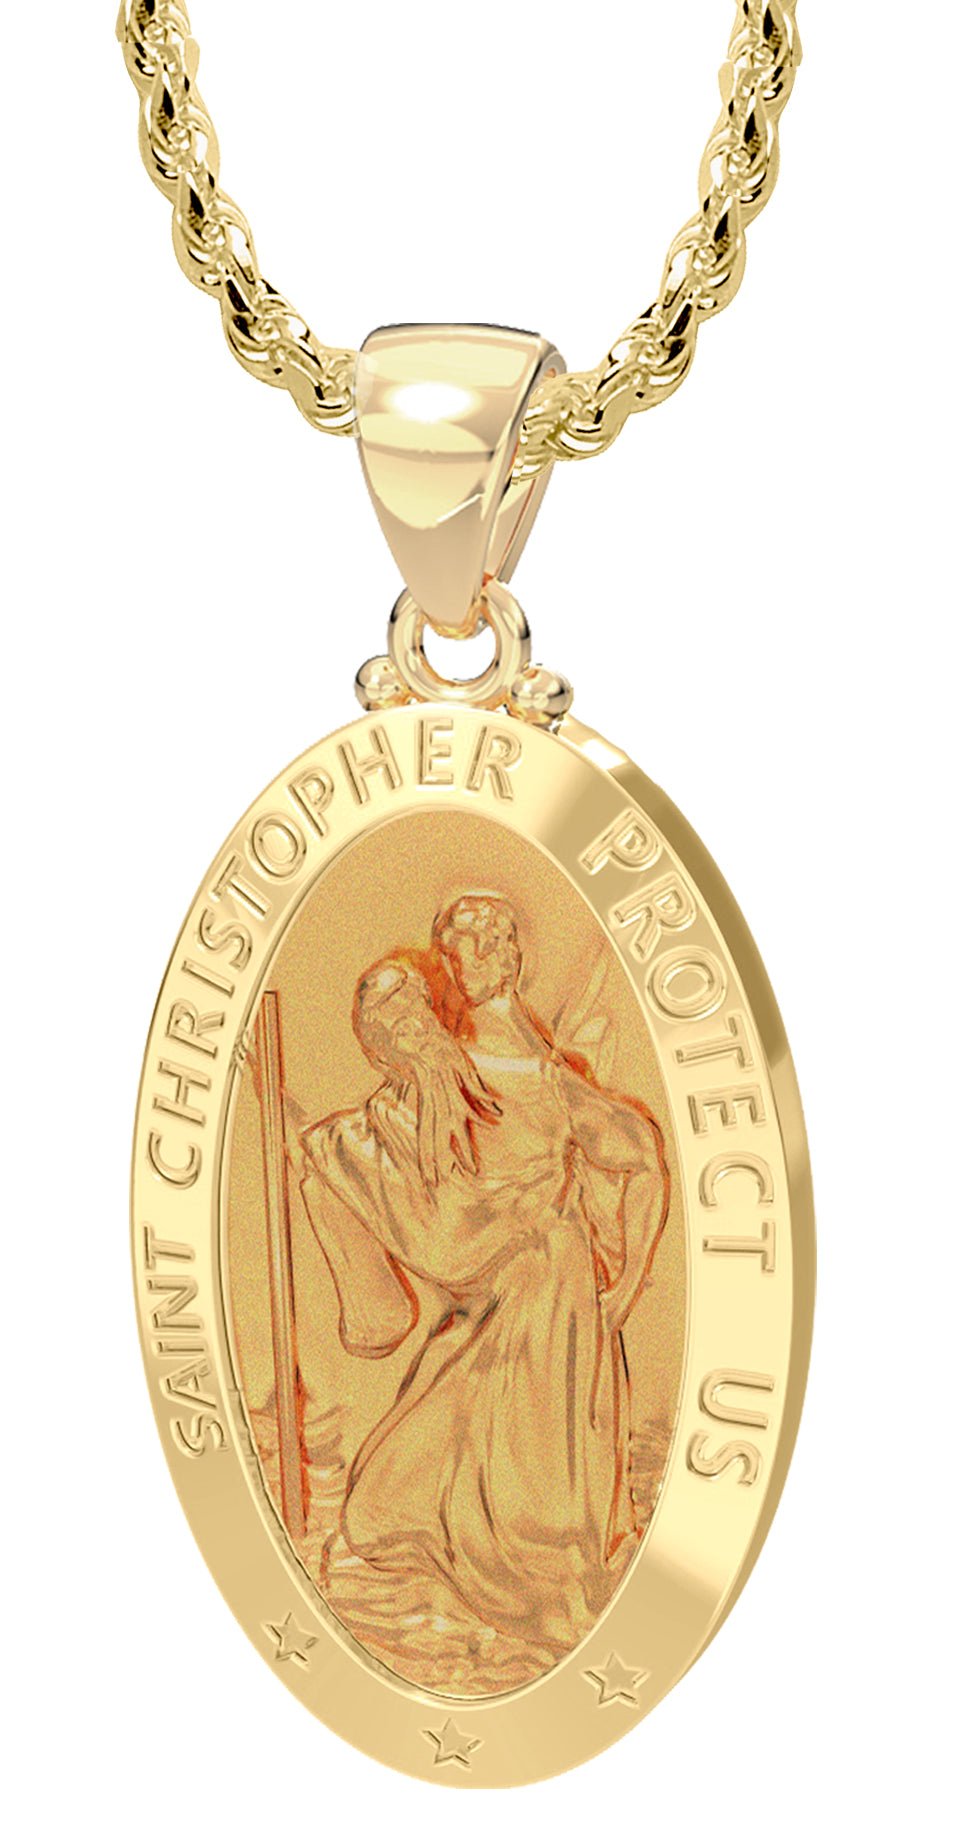 St Christopher Medal - religious | Kelly Waters